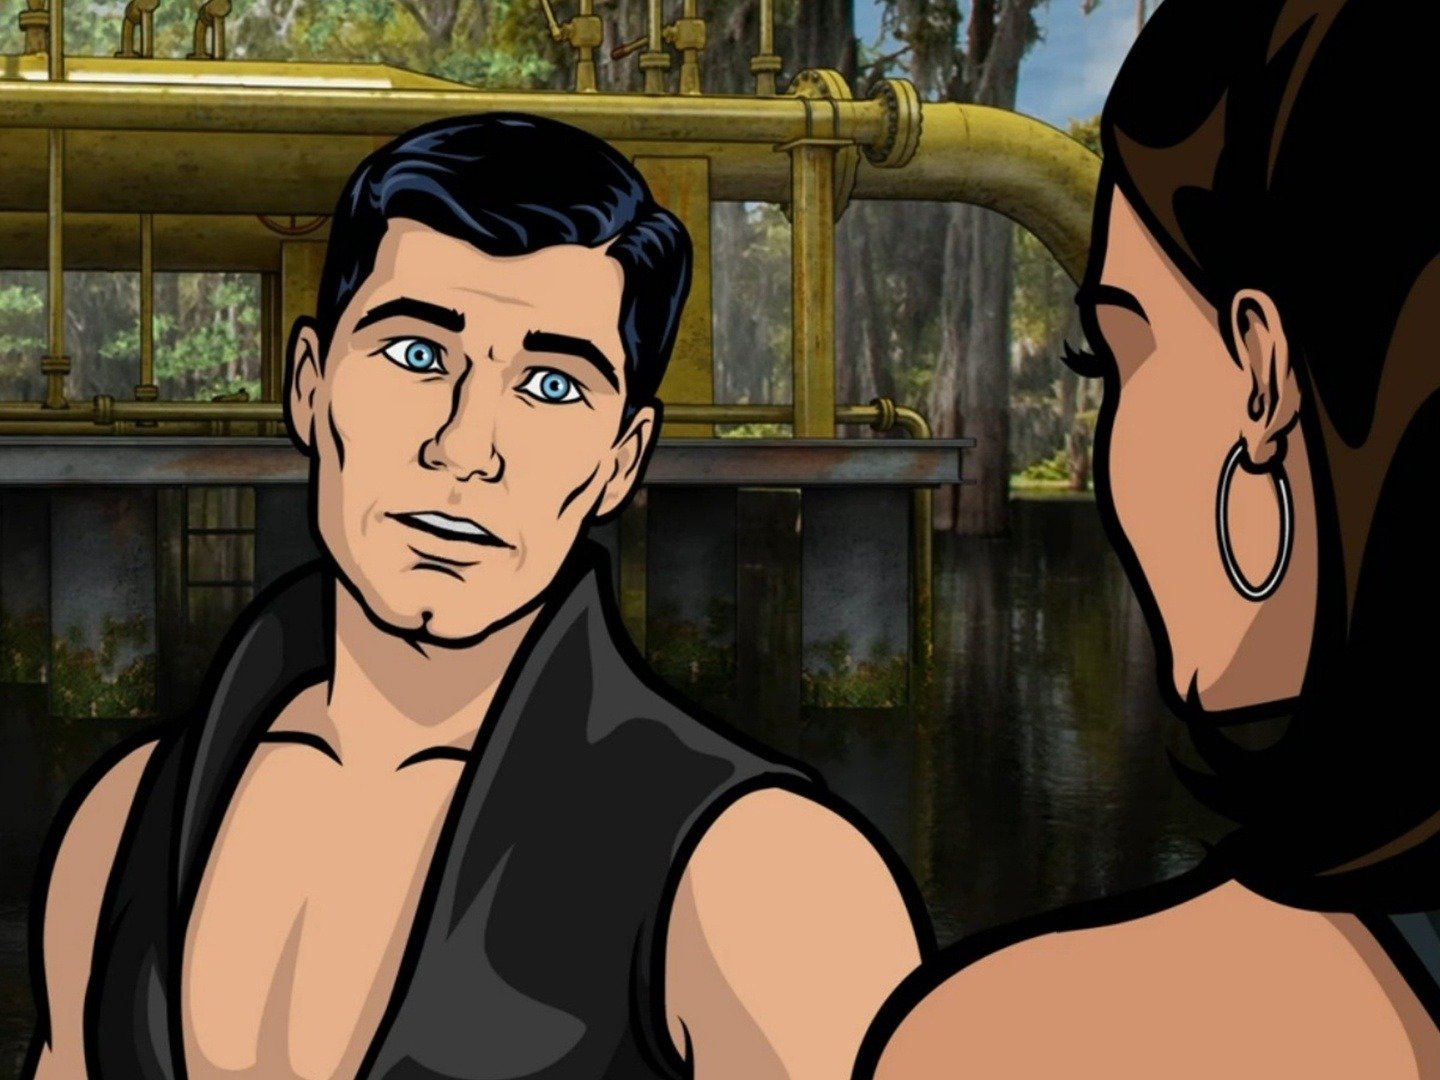 1440px x 1080px - Archer - Rotten Tomatoes